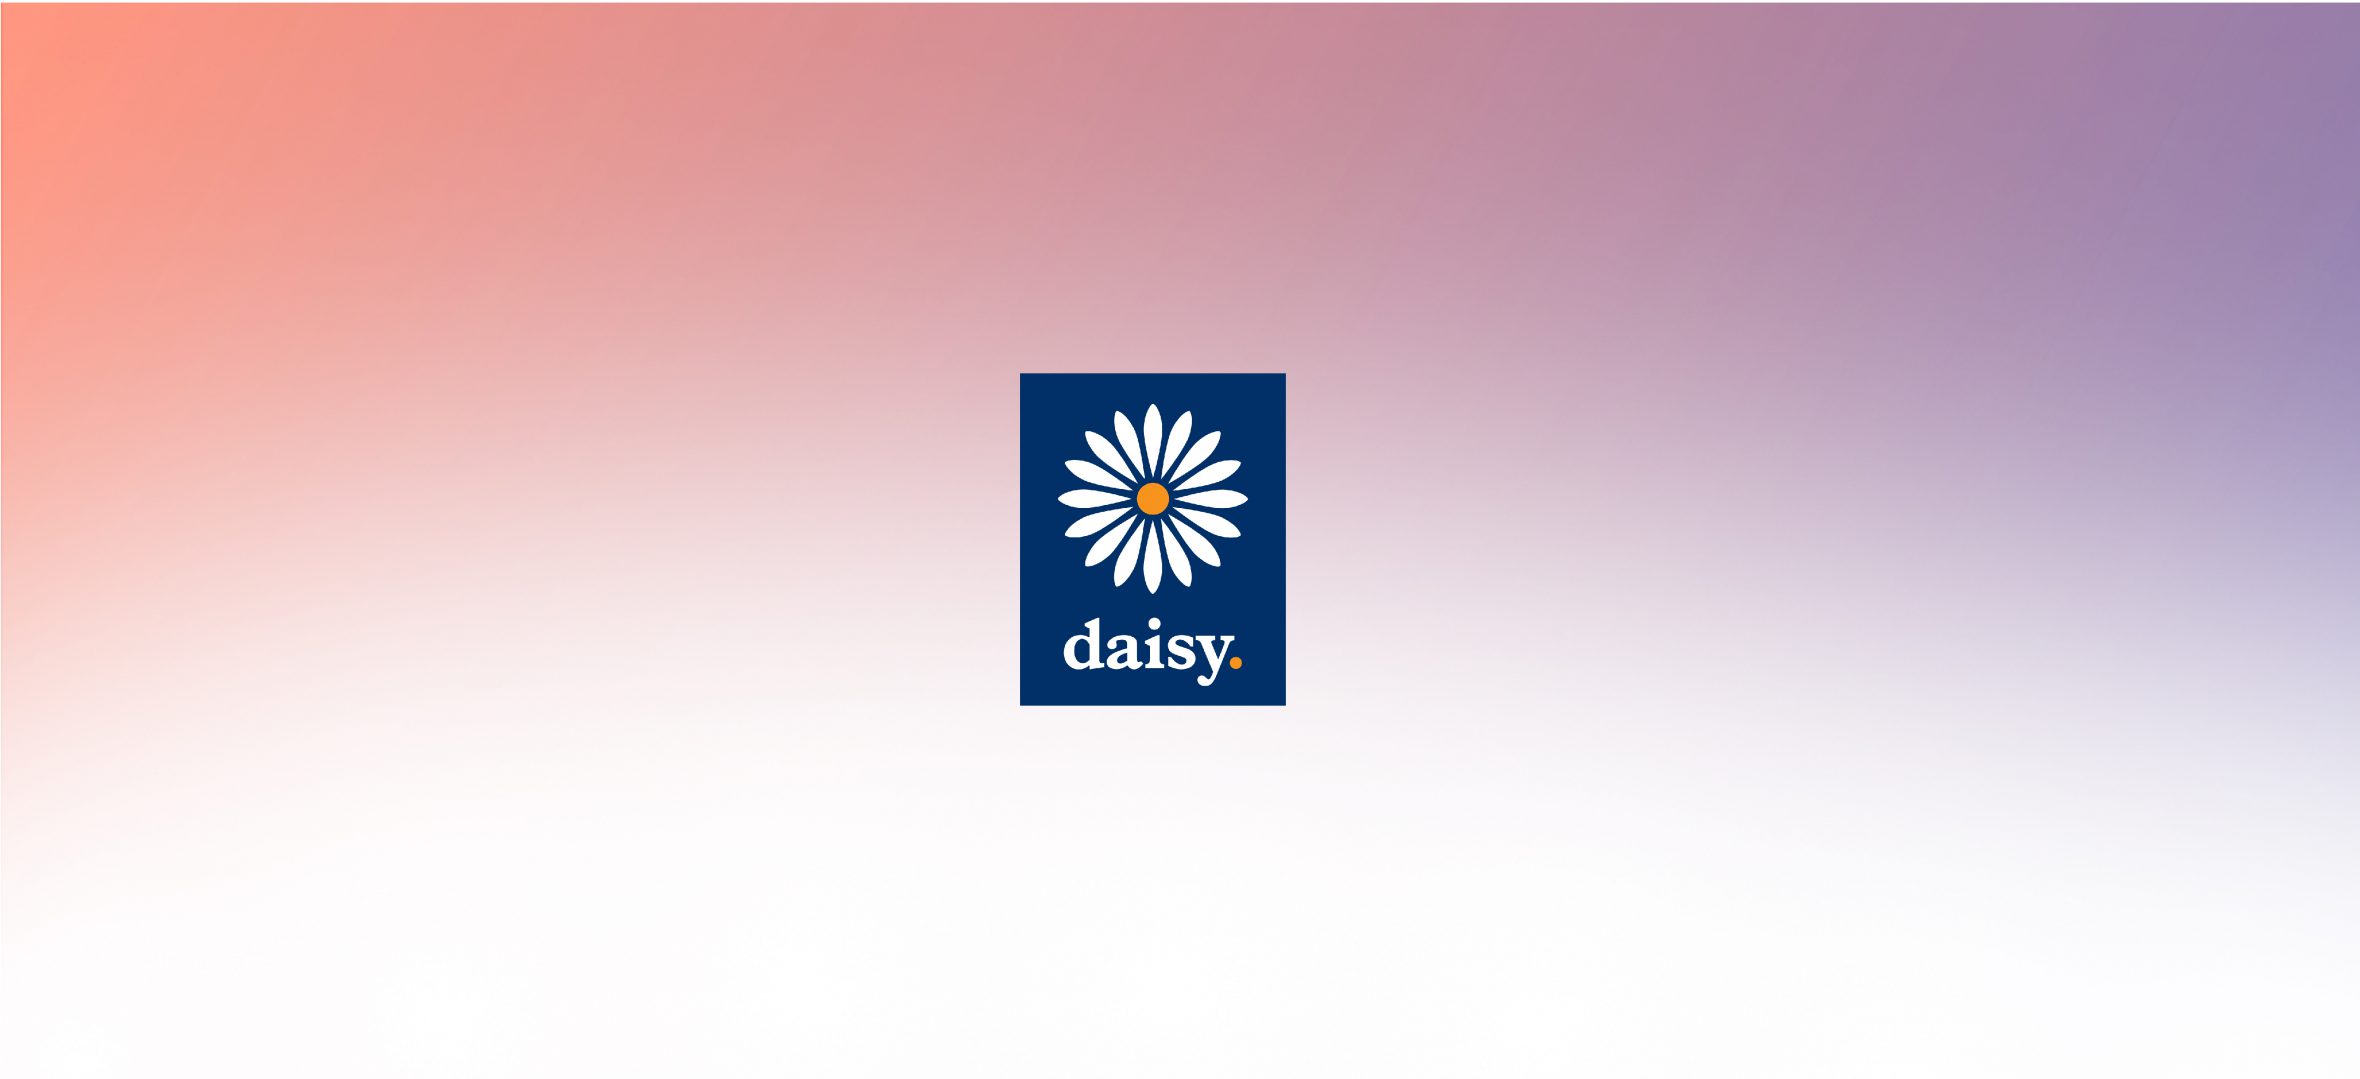 Epsilon Delivers Intelligent Networking for the Daisy Group